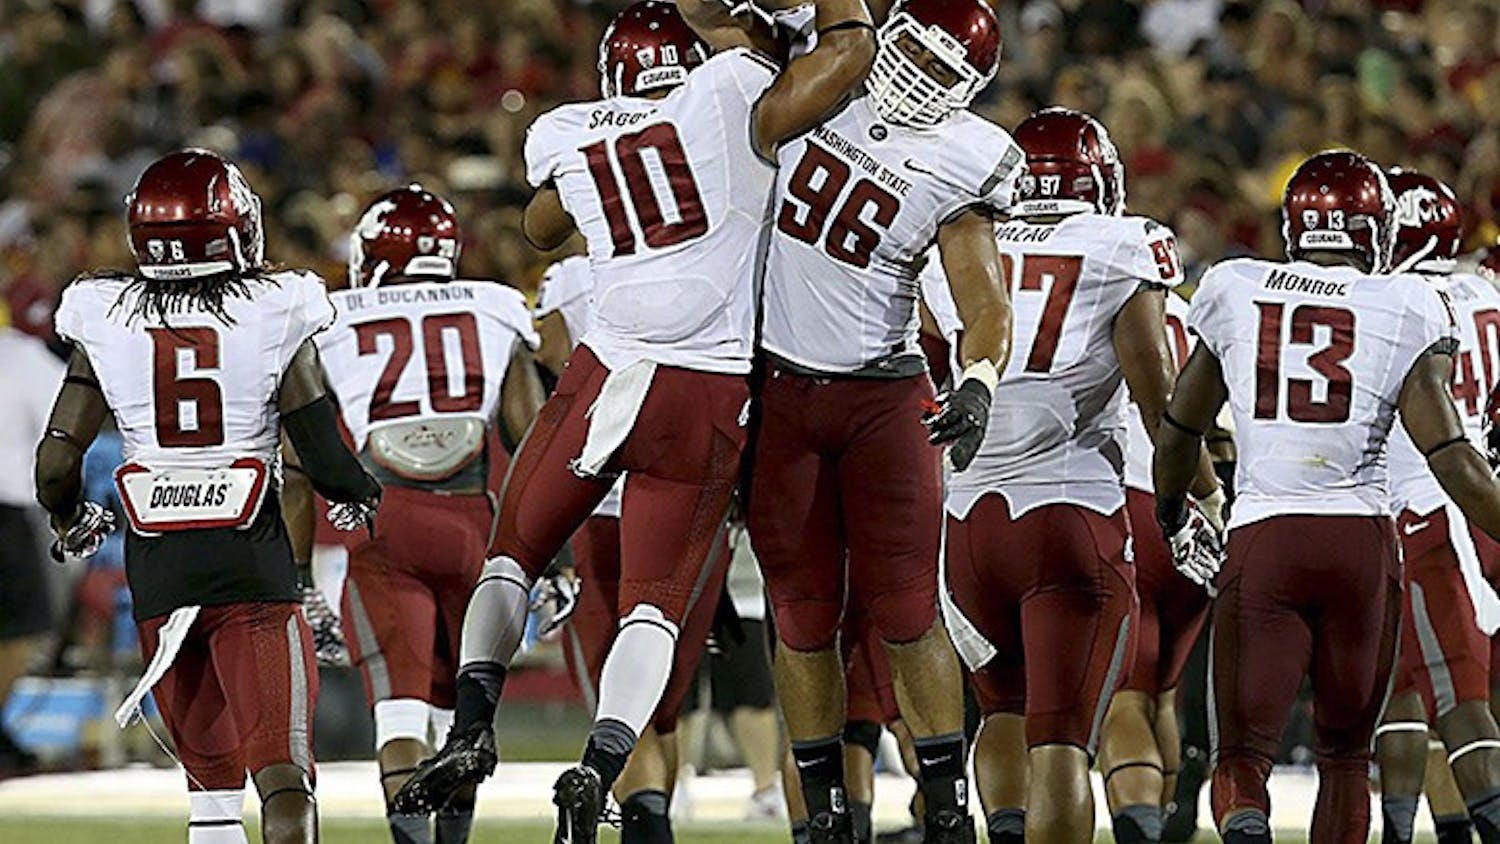 Washington State defenders Justin Sagote (10) and Xavier Cooper (96) celebrate after blocking a field goal attempt by USC&apos;s Andrew Furney in the third quarter at the Los Angeles Coliseum on Saturday, September 7, 2013, in Los Angeles, California. (Luis Sinco/Los Angeles Times/MCT)